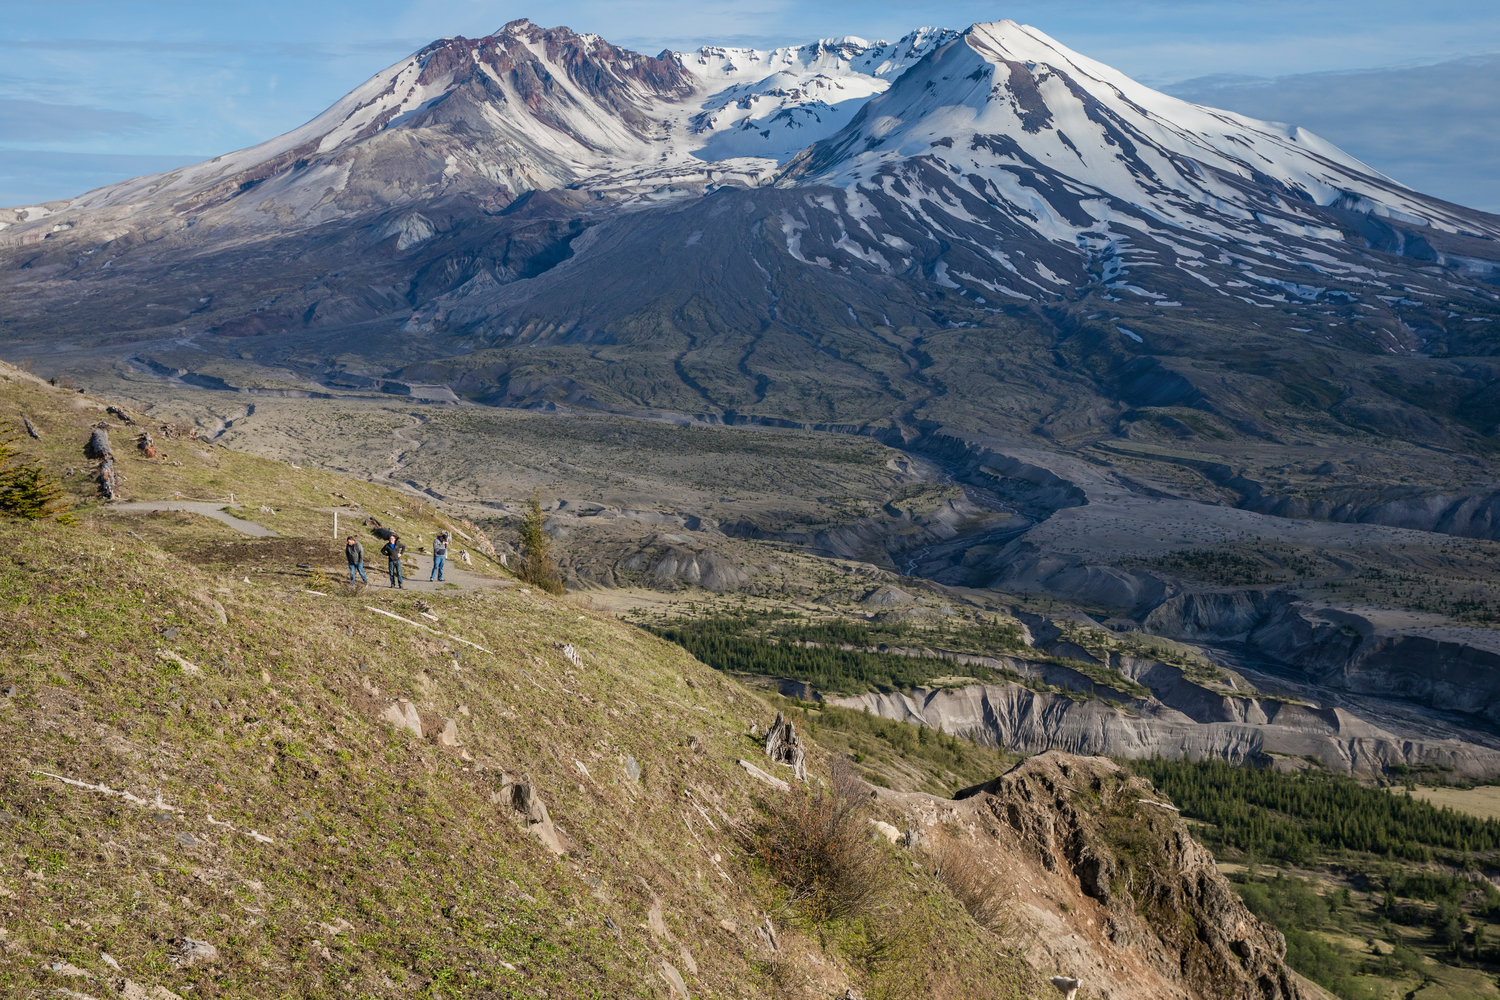 Hikers and mountain goats look on from the Mount Margaret Backcountry in the Gifford Pinchot National Forest on June 8 near Mount St. Helens.